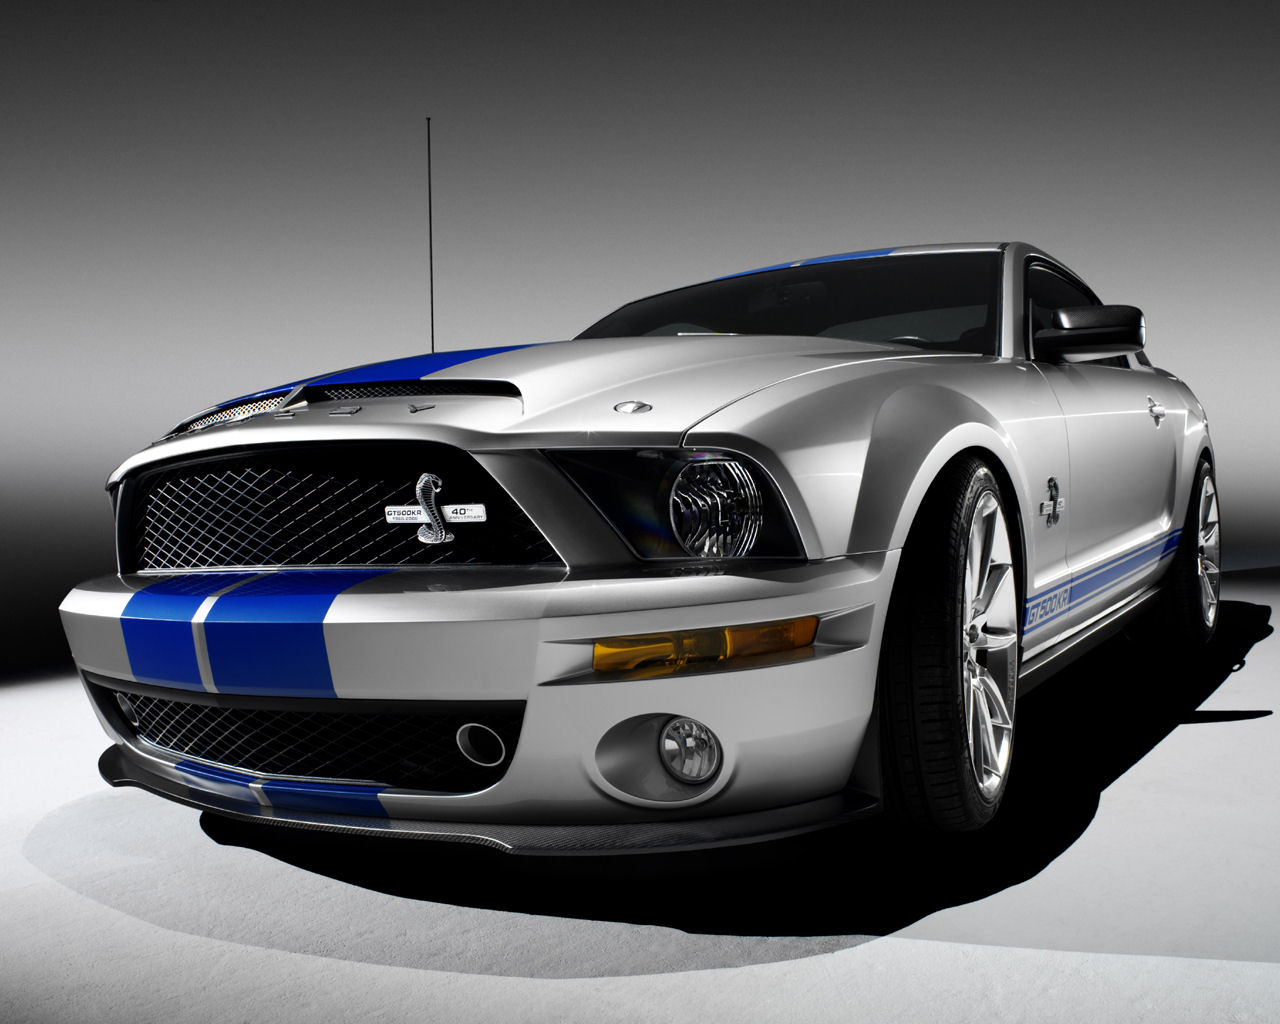 On The Ford Mustang Wallpaper Below And Choose Set As Background